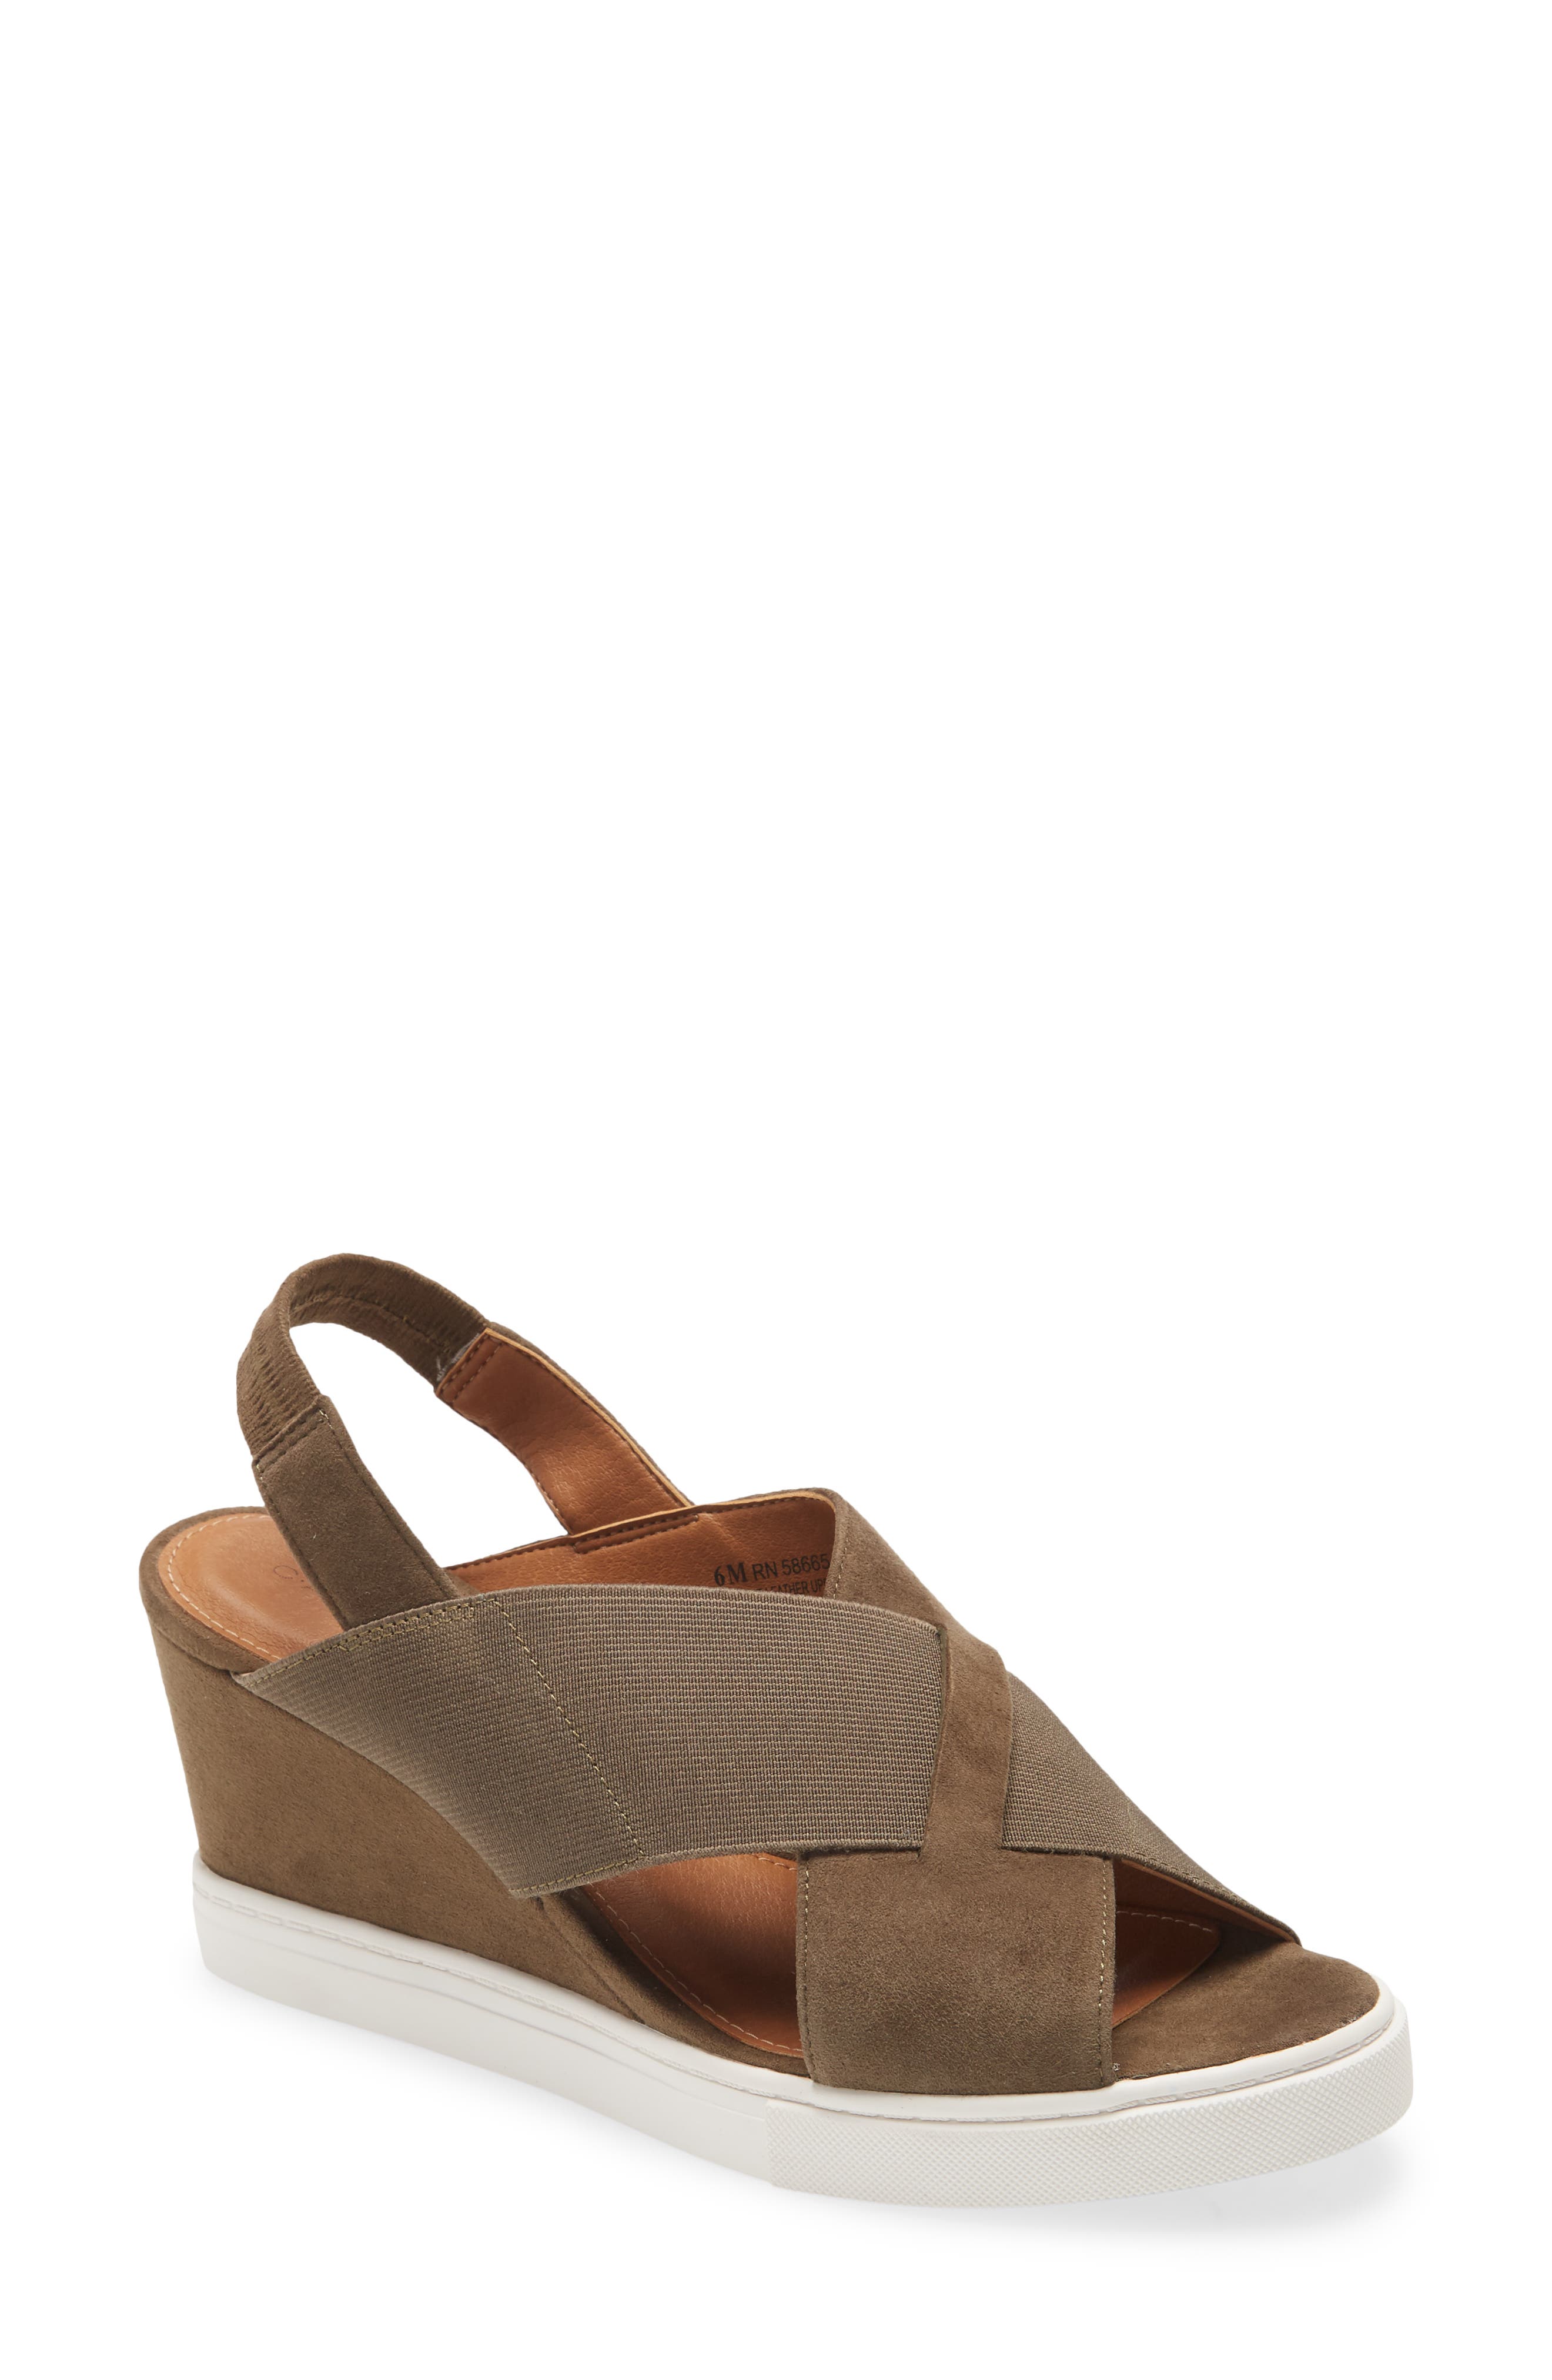 nordstrom womens wedges